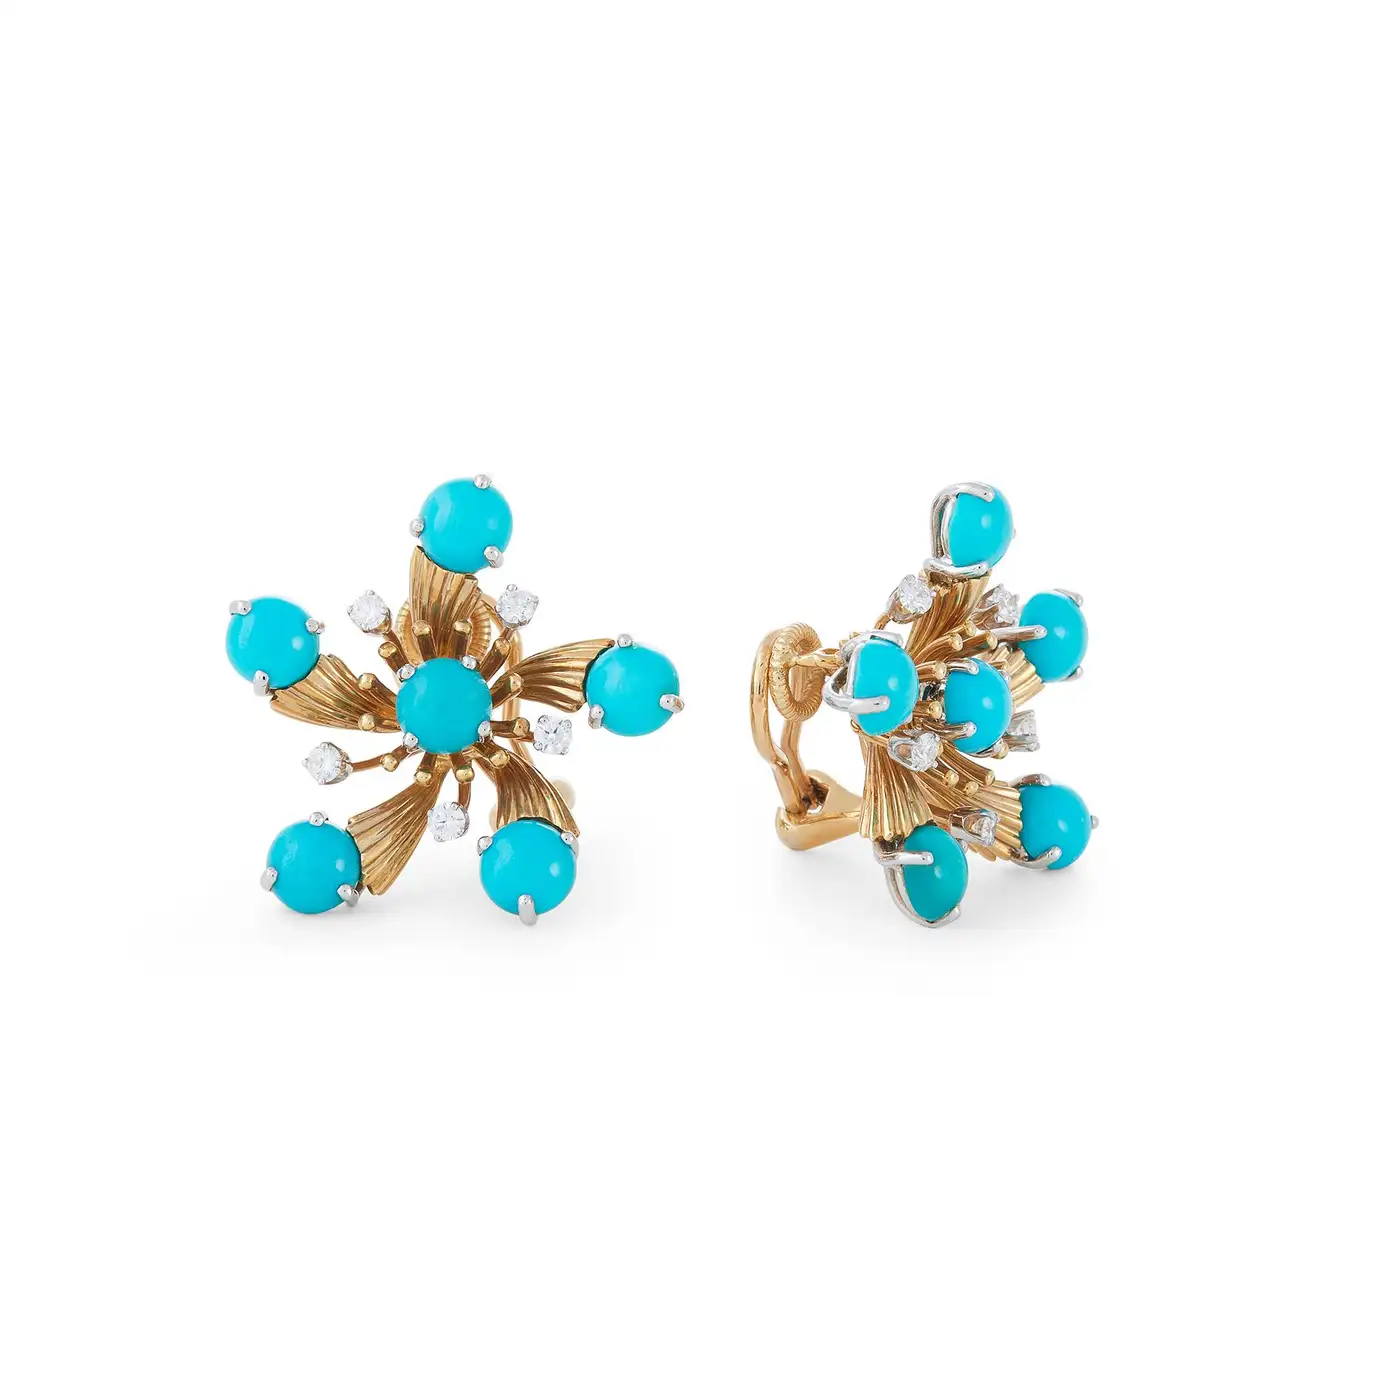 Snowflake-Turquoise-and-Diamond-Ear-Clips-Jean-Schlumberger-for-Tiffany-Co-5.webp